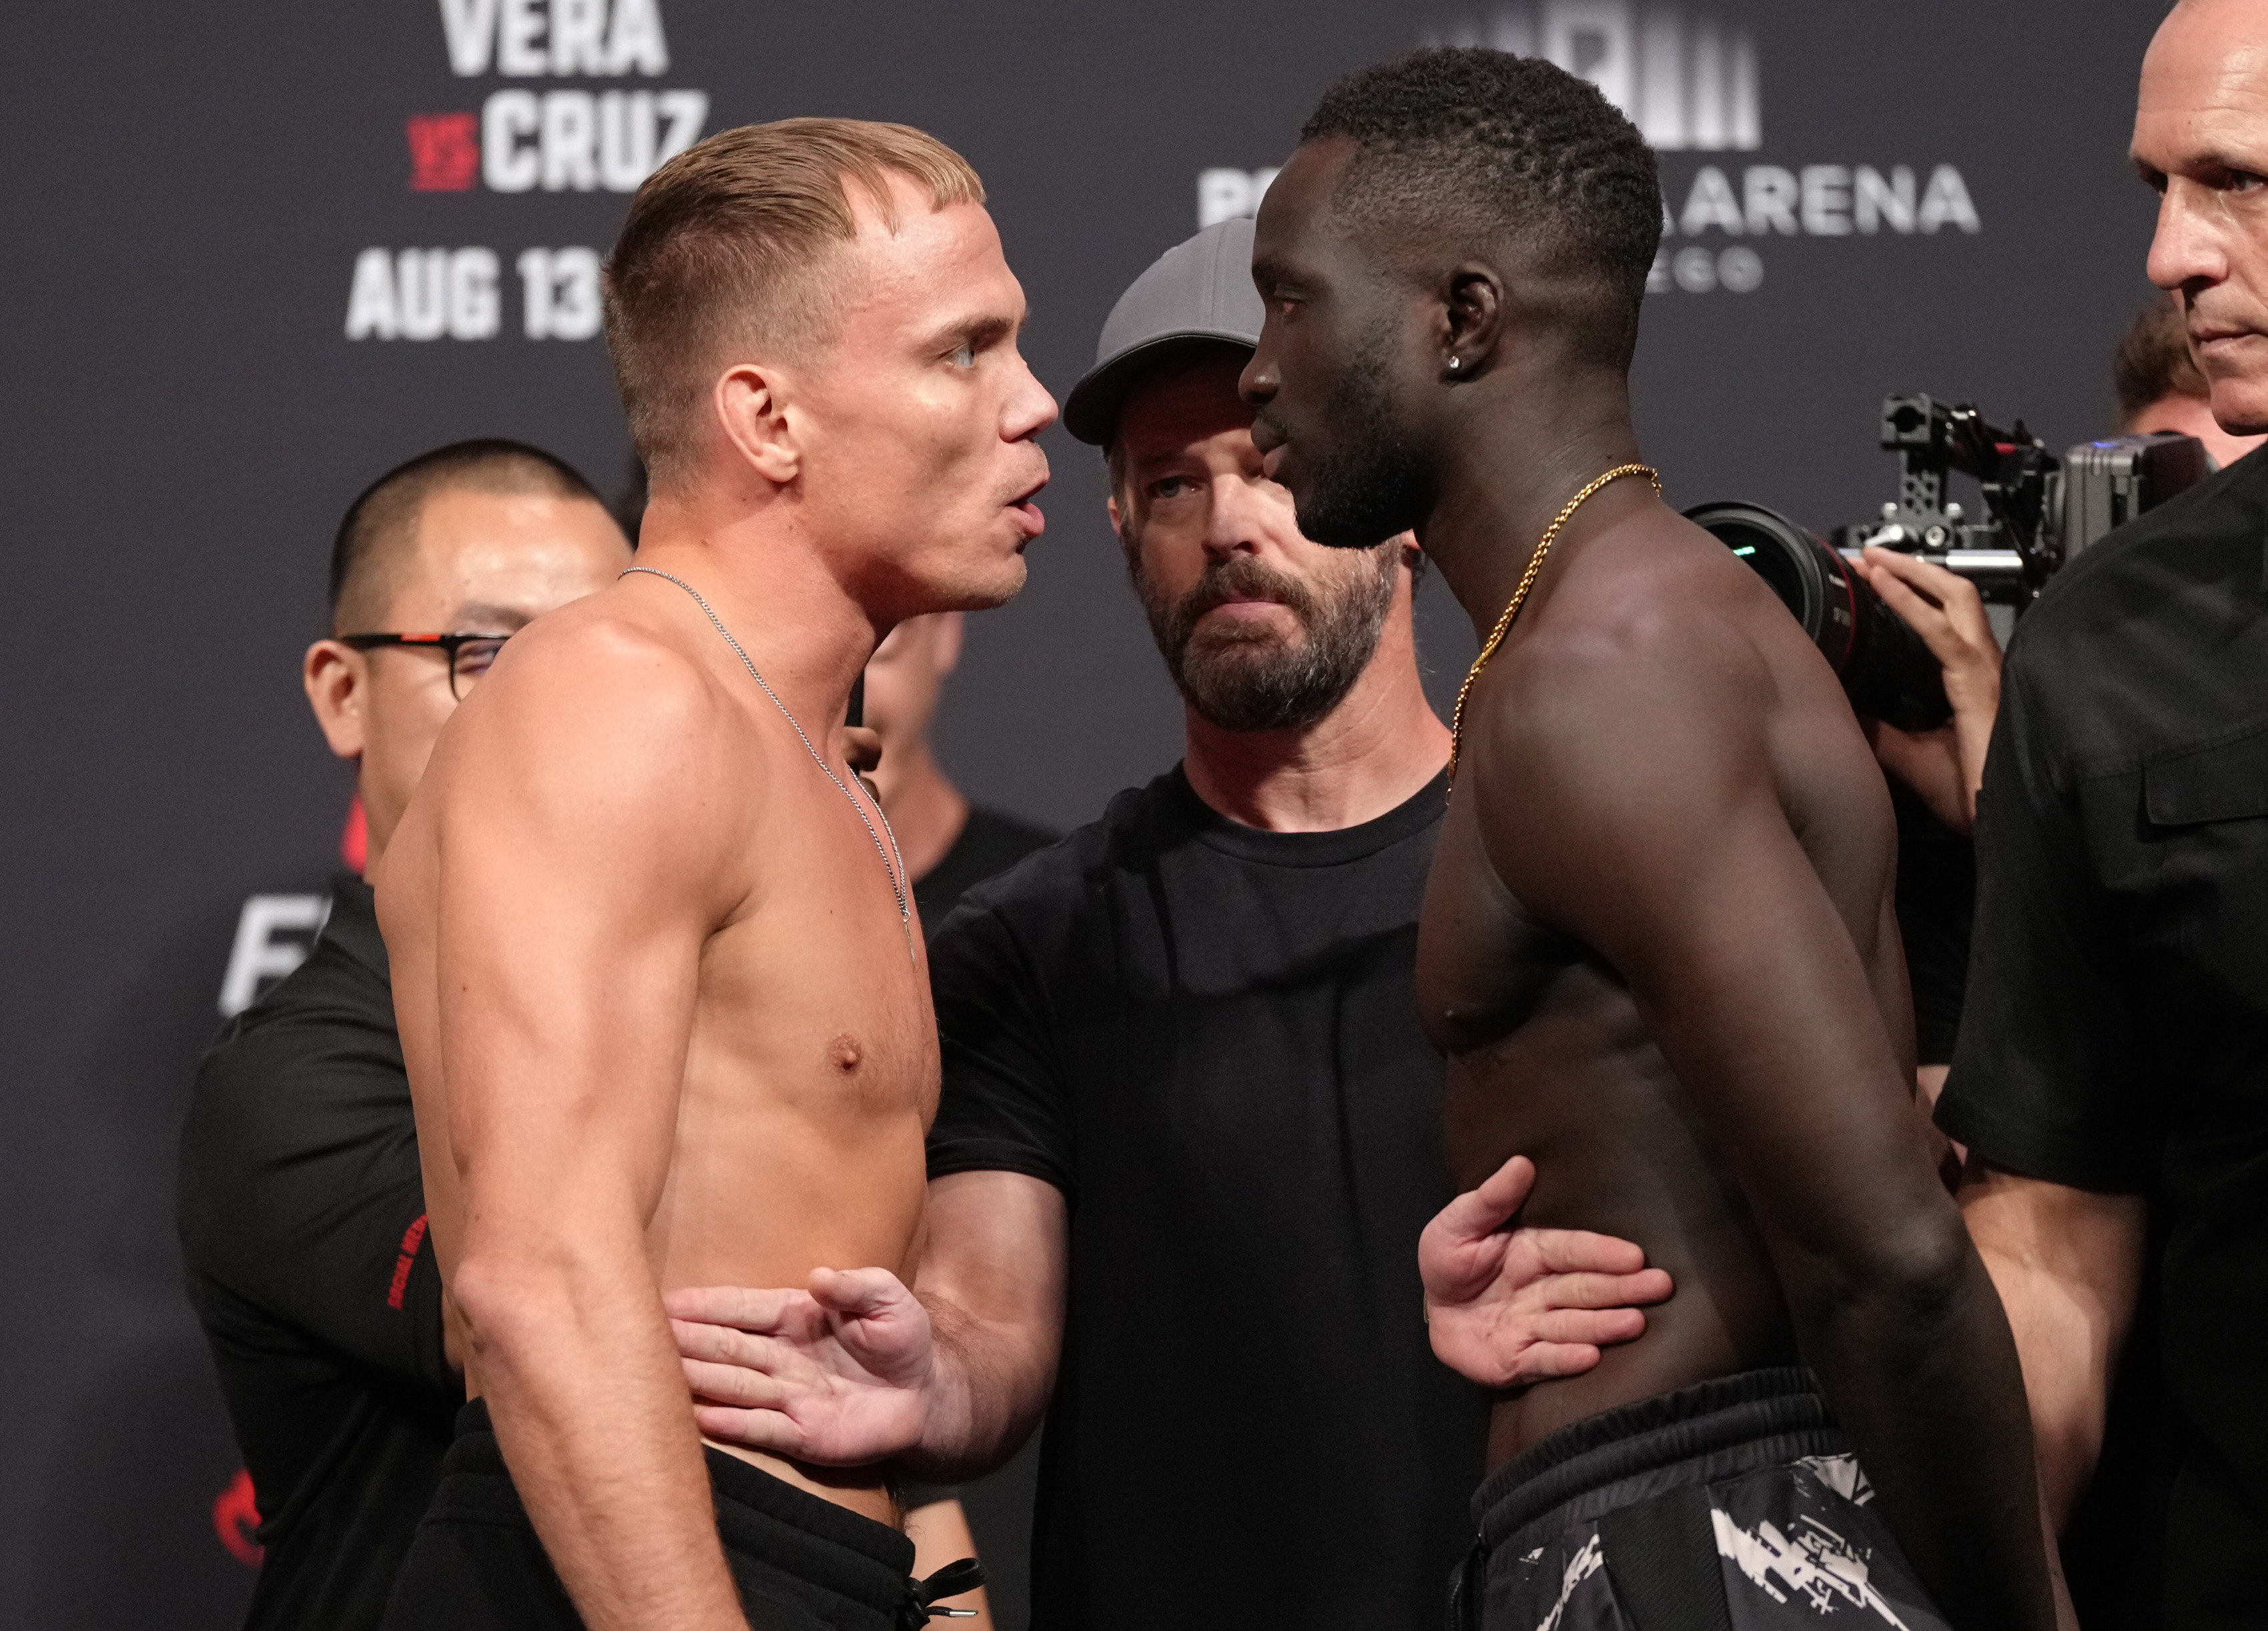 Opponents Nate Landwehr and David Onama of Uganda face off during the UFC Fight Night ceremonial weigh-in at Pechanga Arena on August 12, 2022 in San Diego, California.